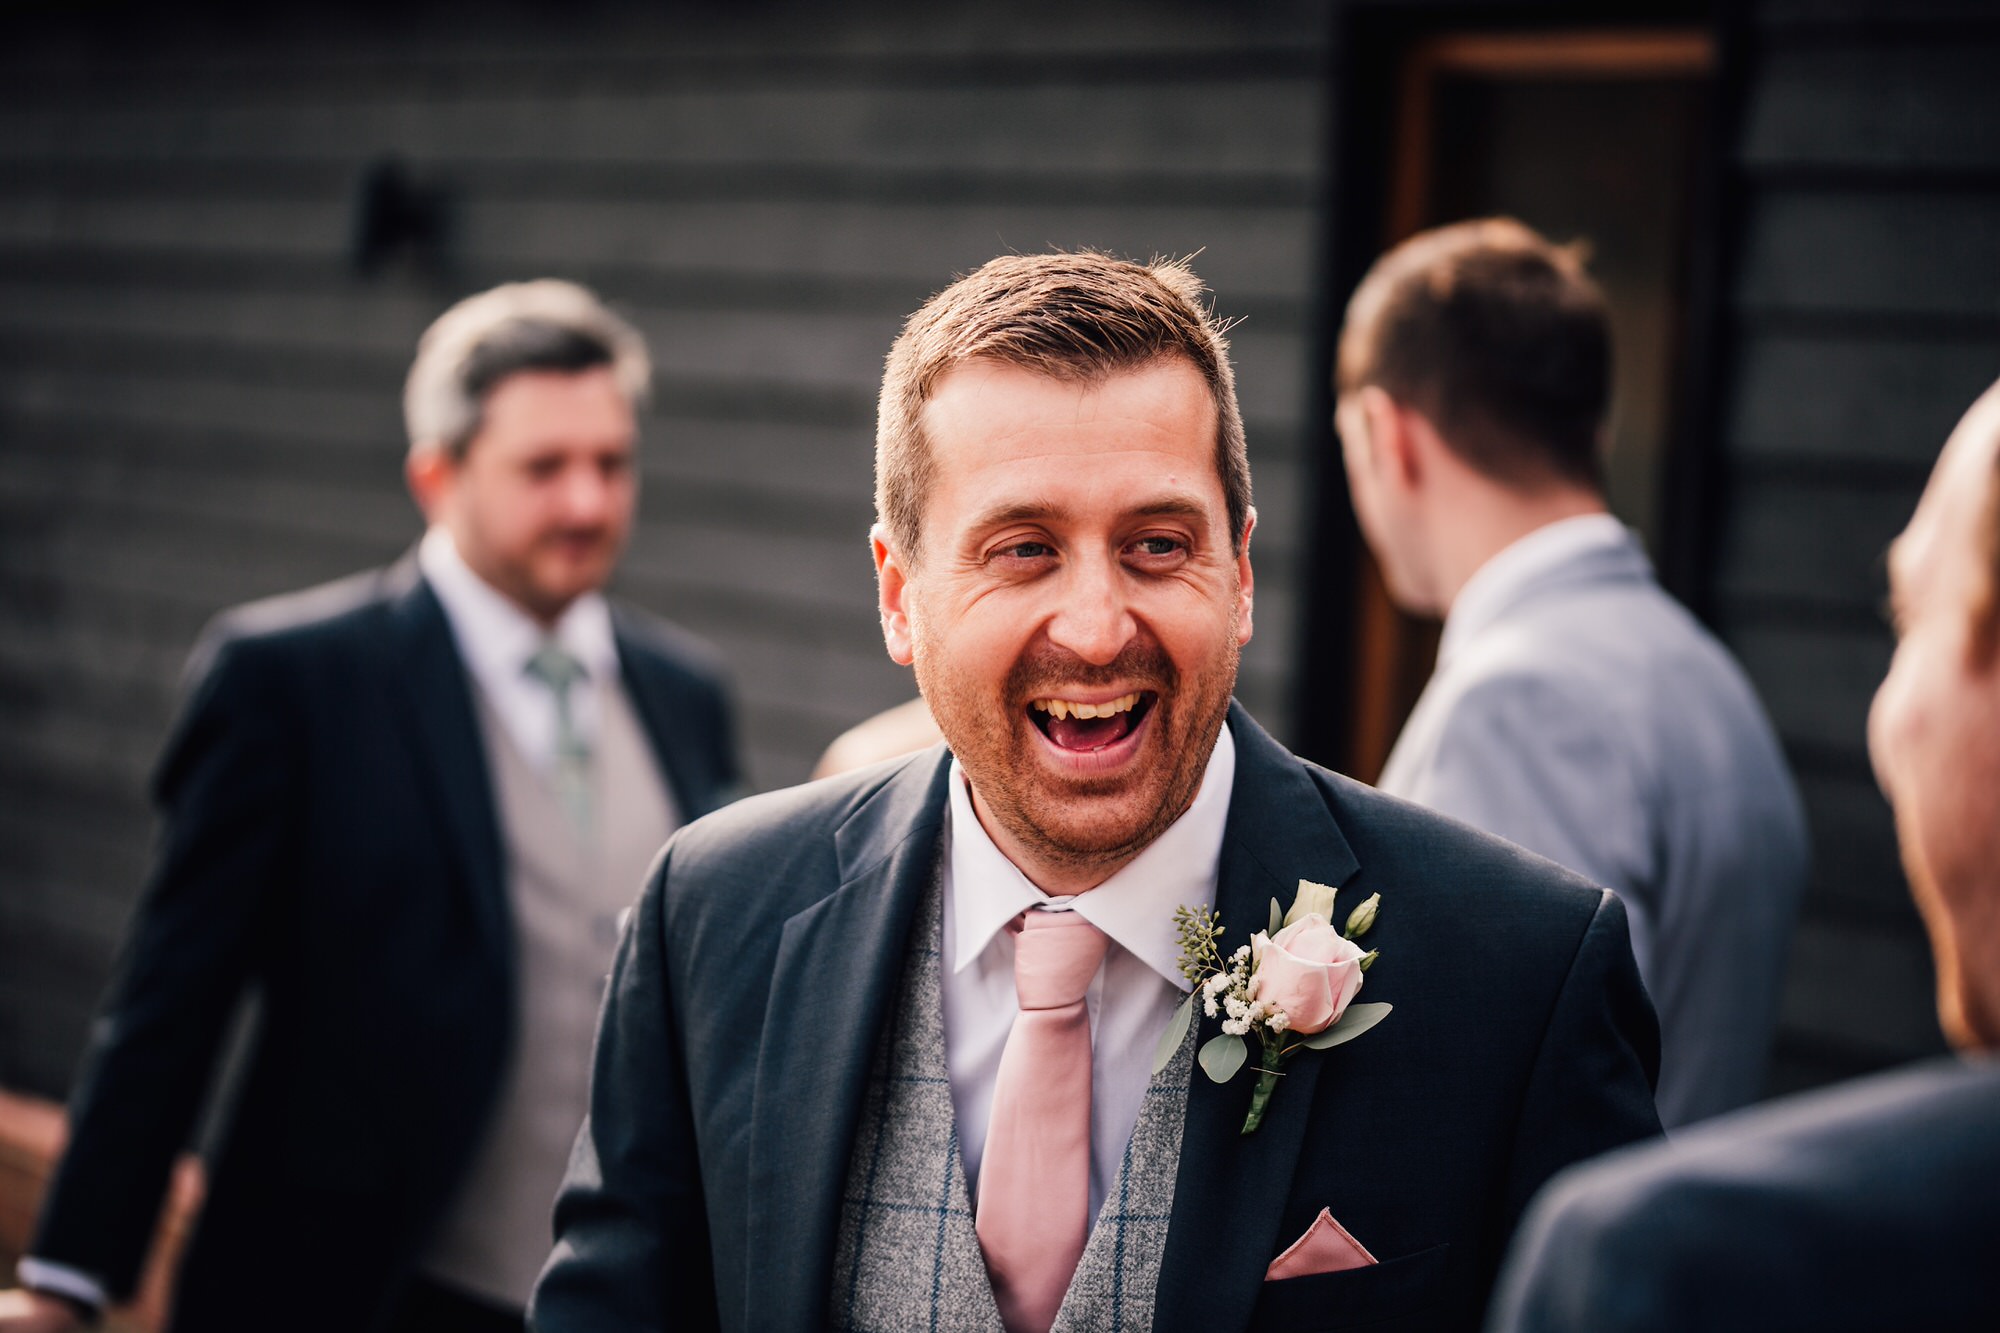 candid photo of groom laughing